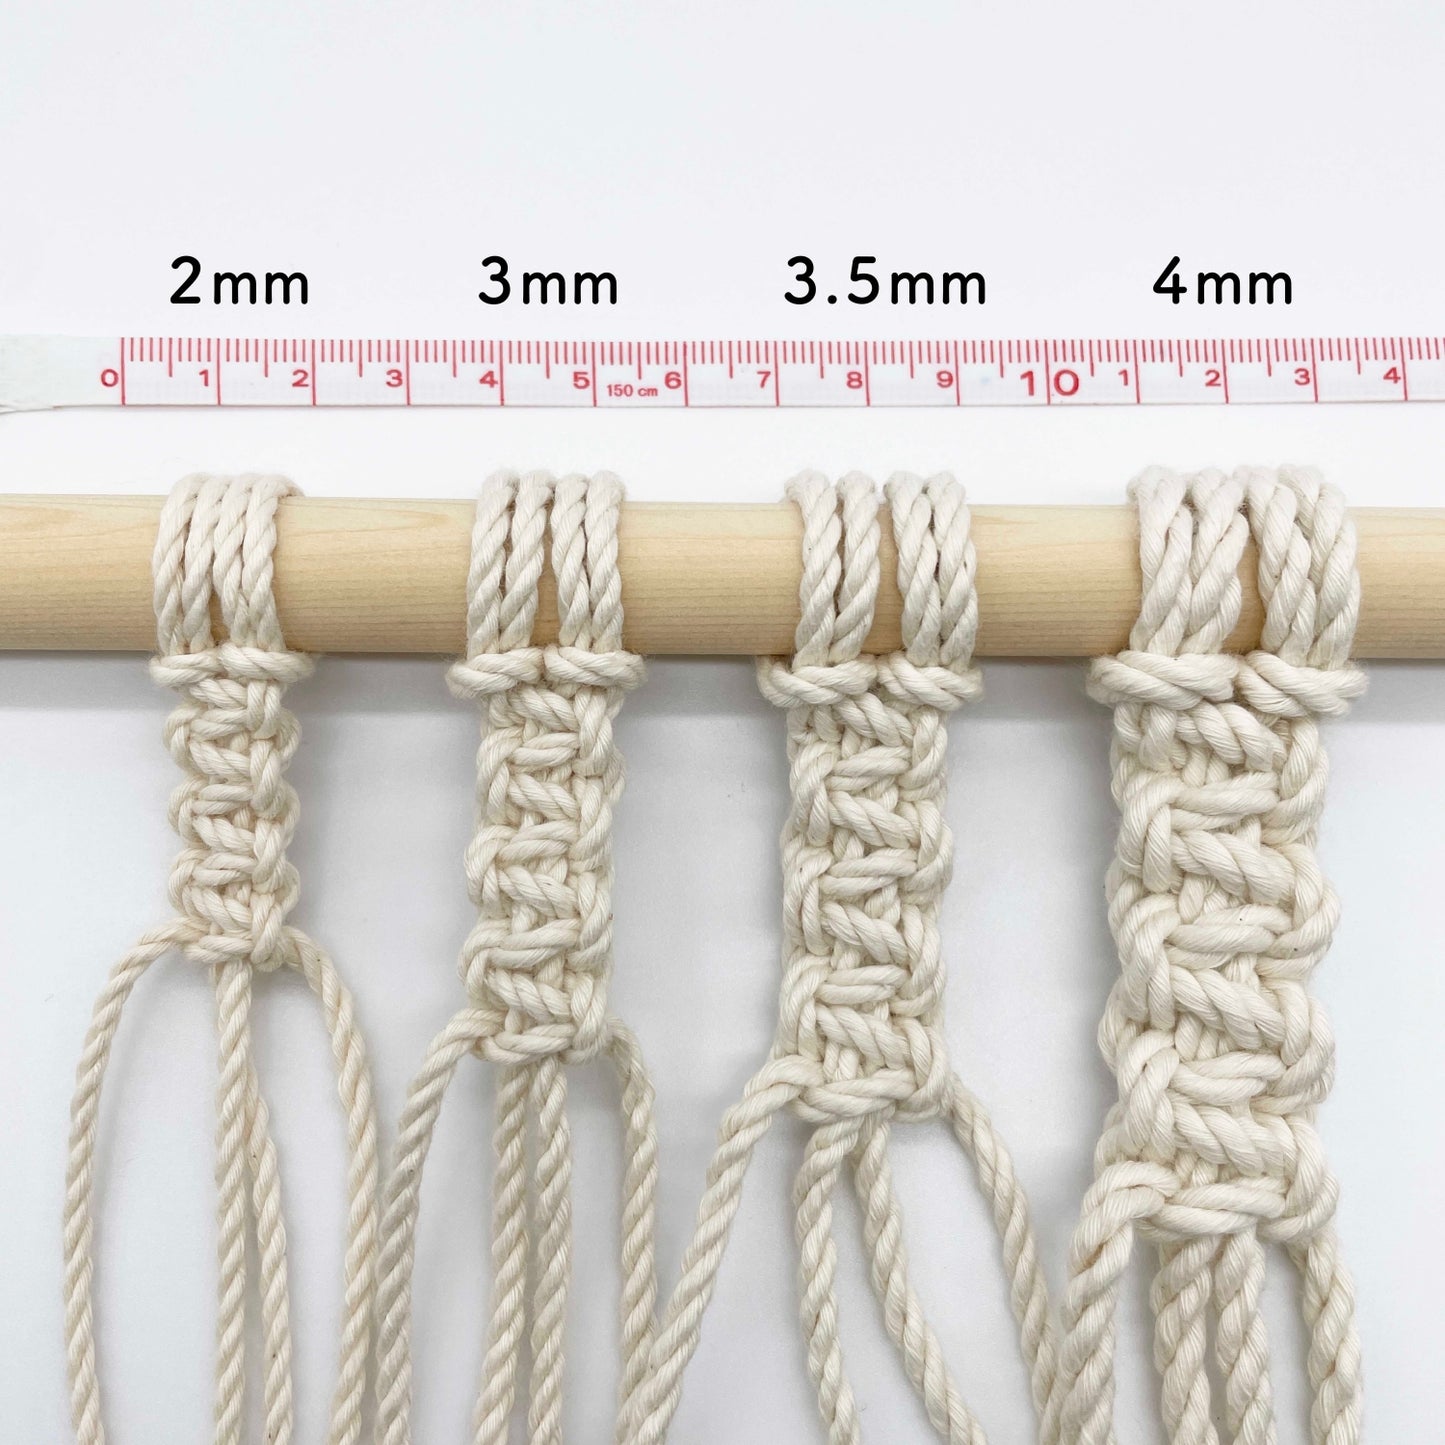 3mm/Natural/80m (about 250g) 3-Strand fair-trade organic cotton